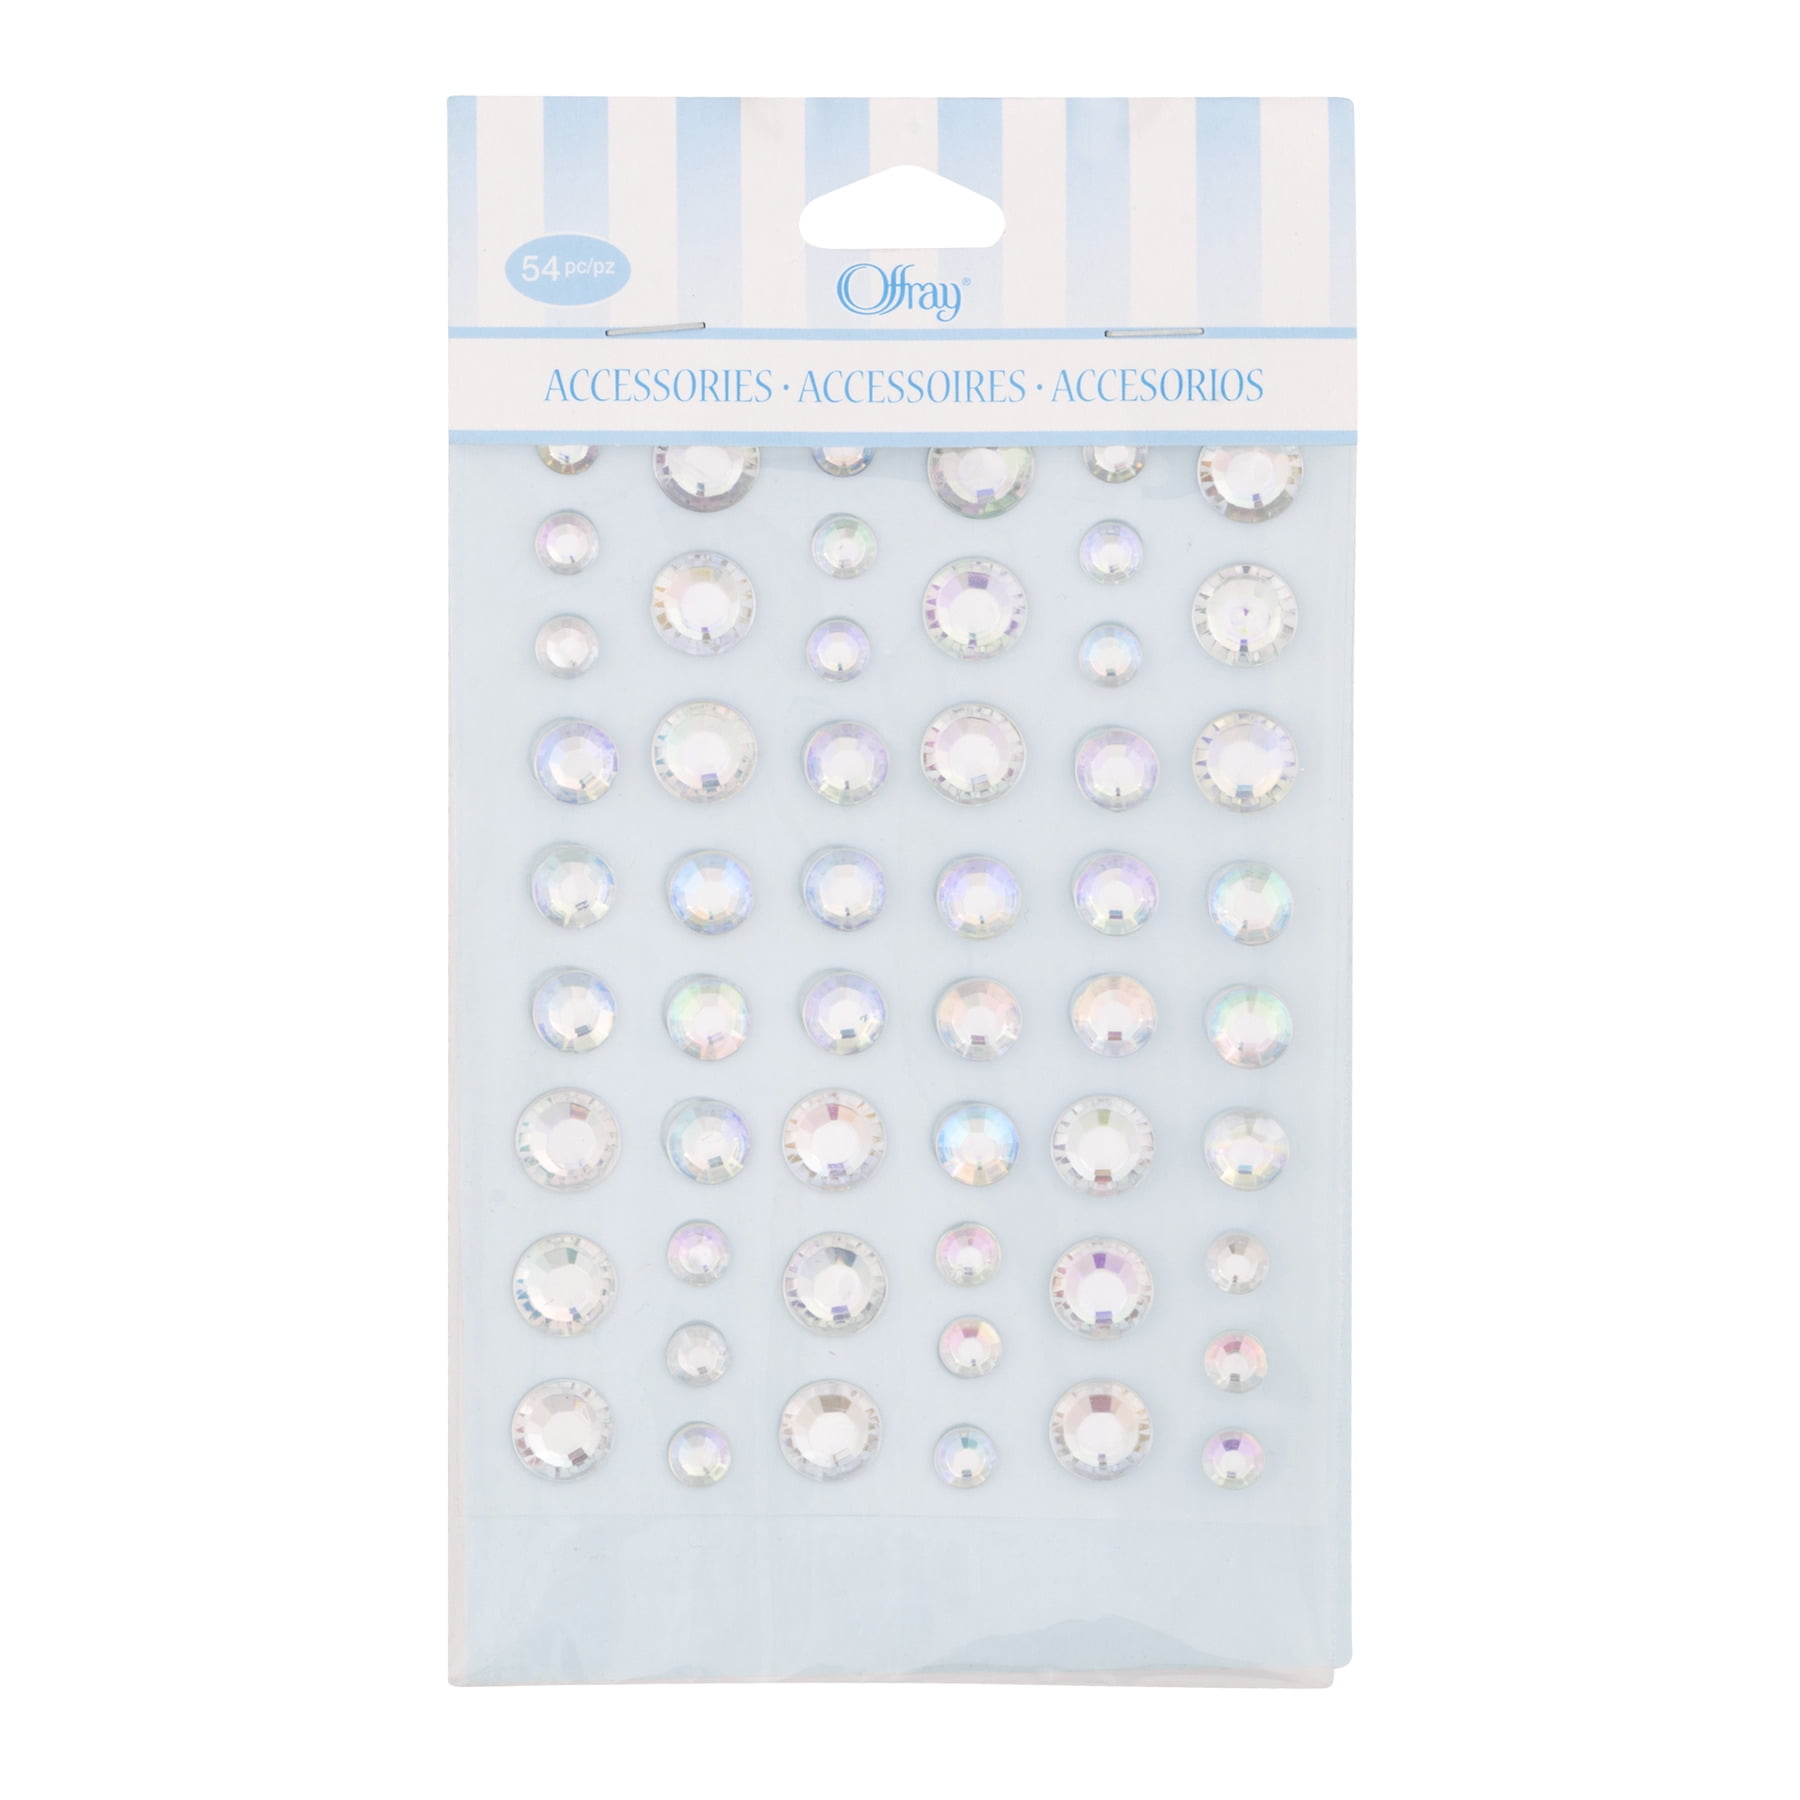 Offray Silver Adhesive Multi Gems, 54-Count - Walmart.com